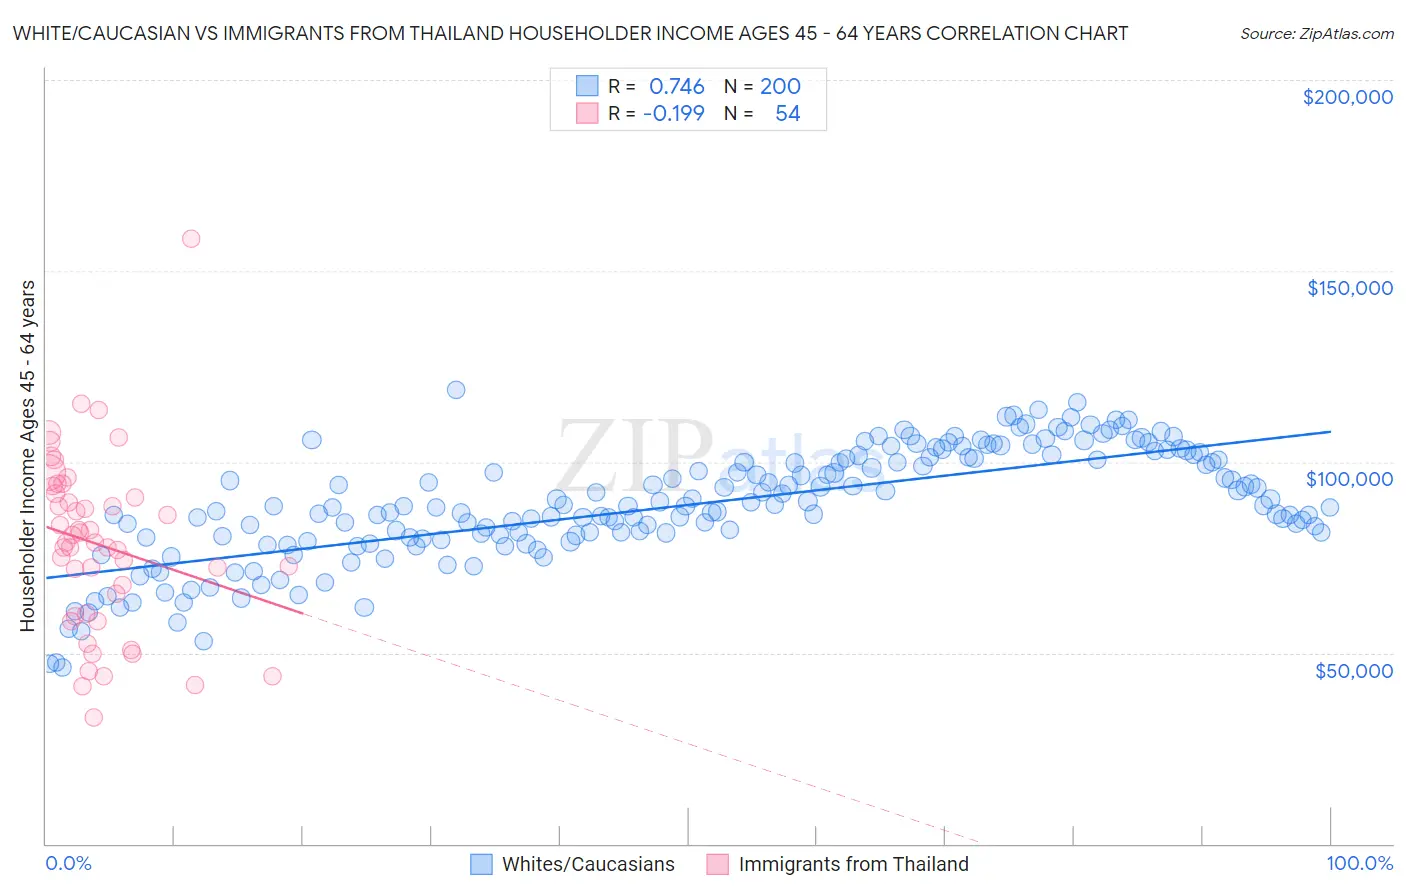 White/Caucasian vs Immigrants from Thailand Householder Income Ages 45 - 64 years